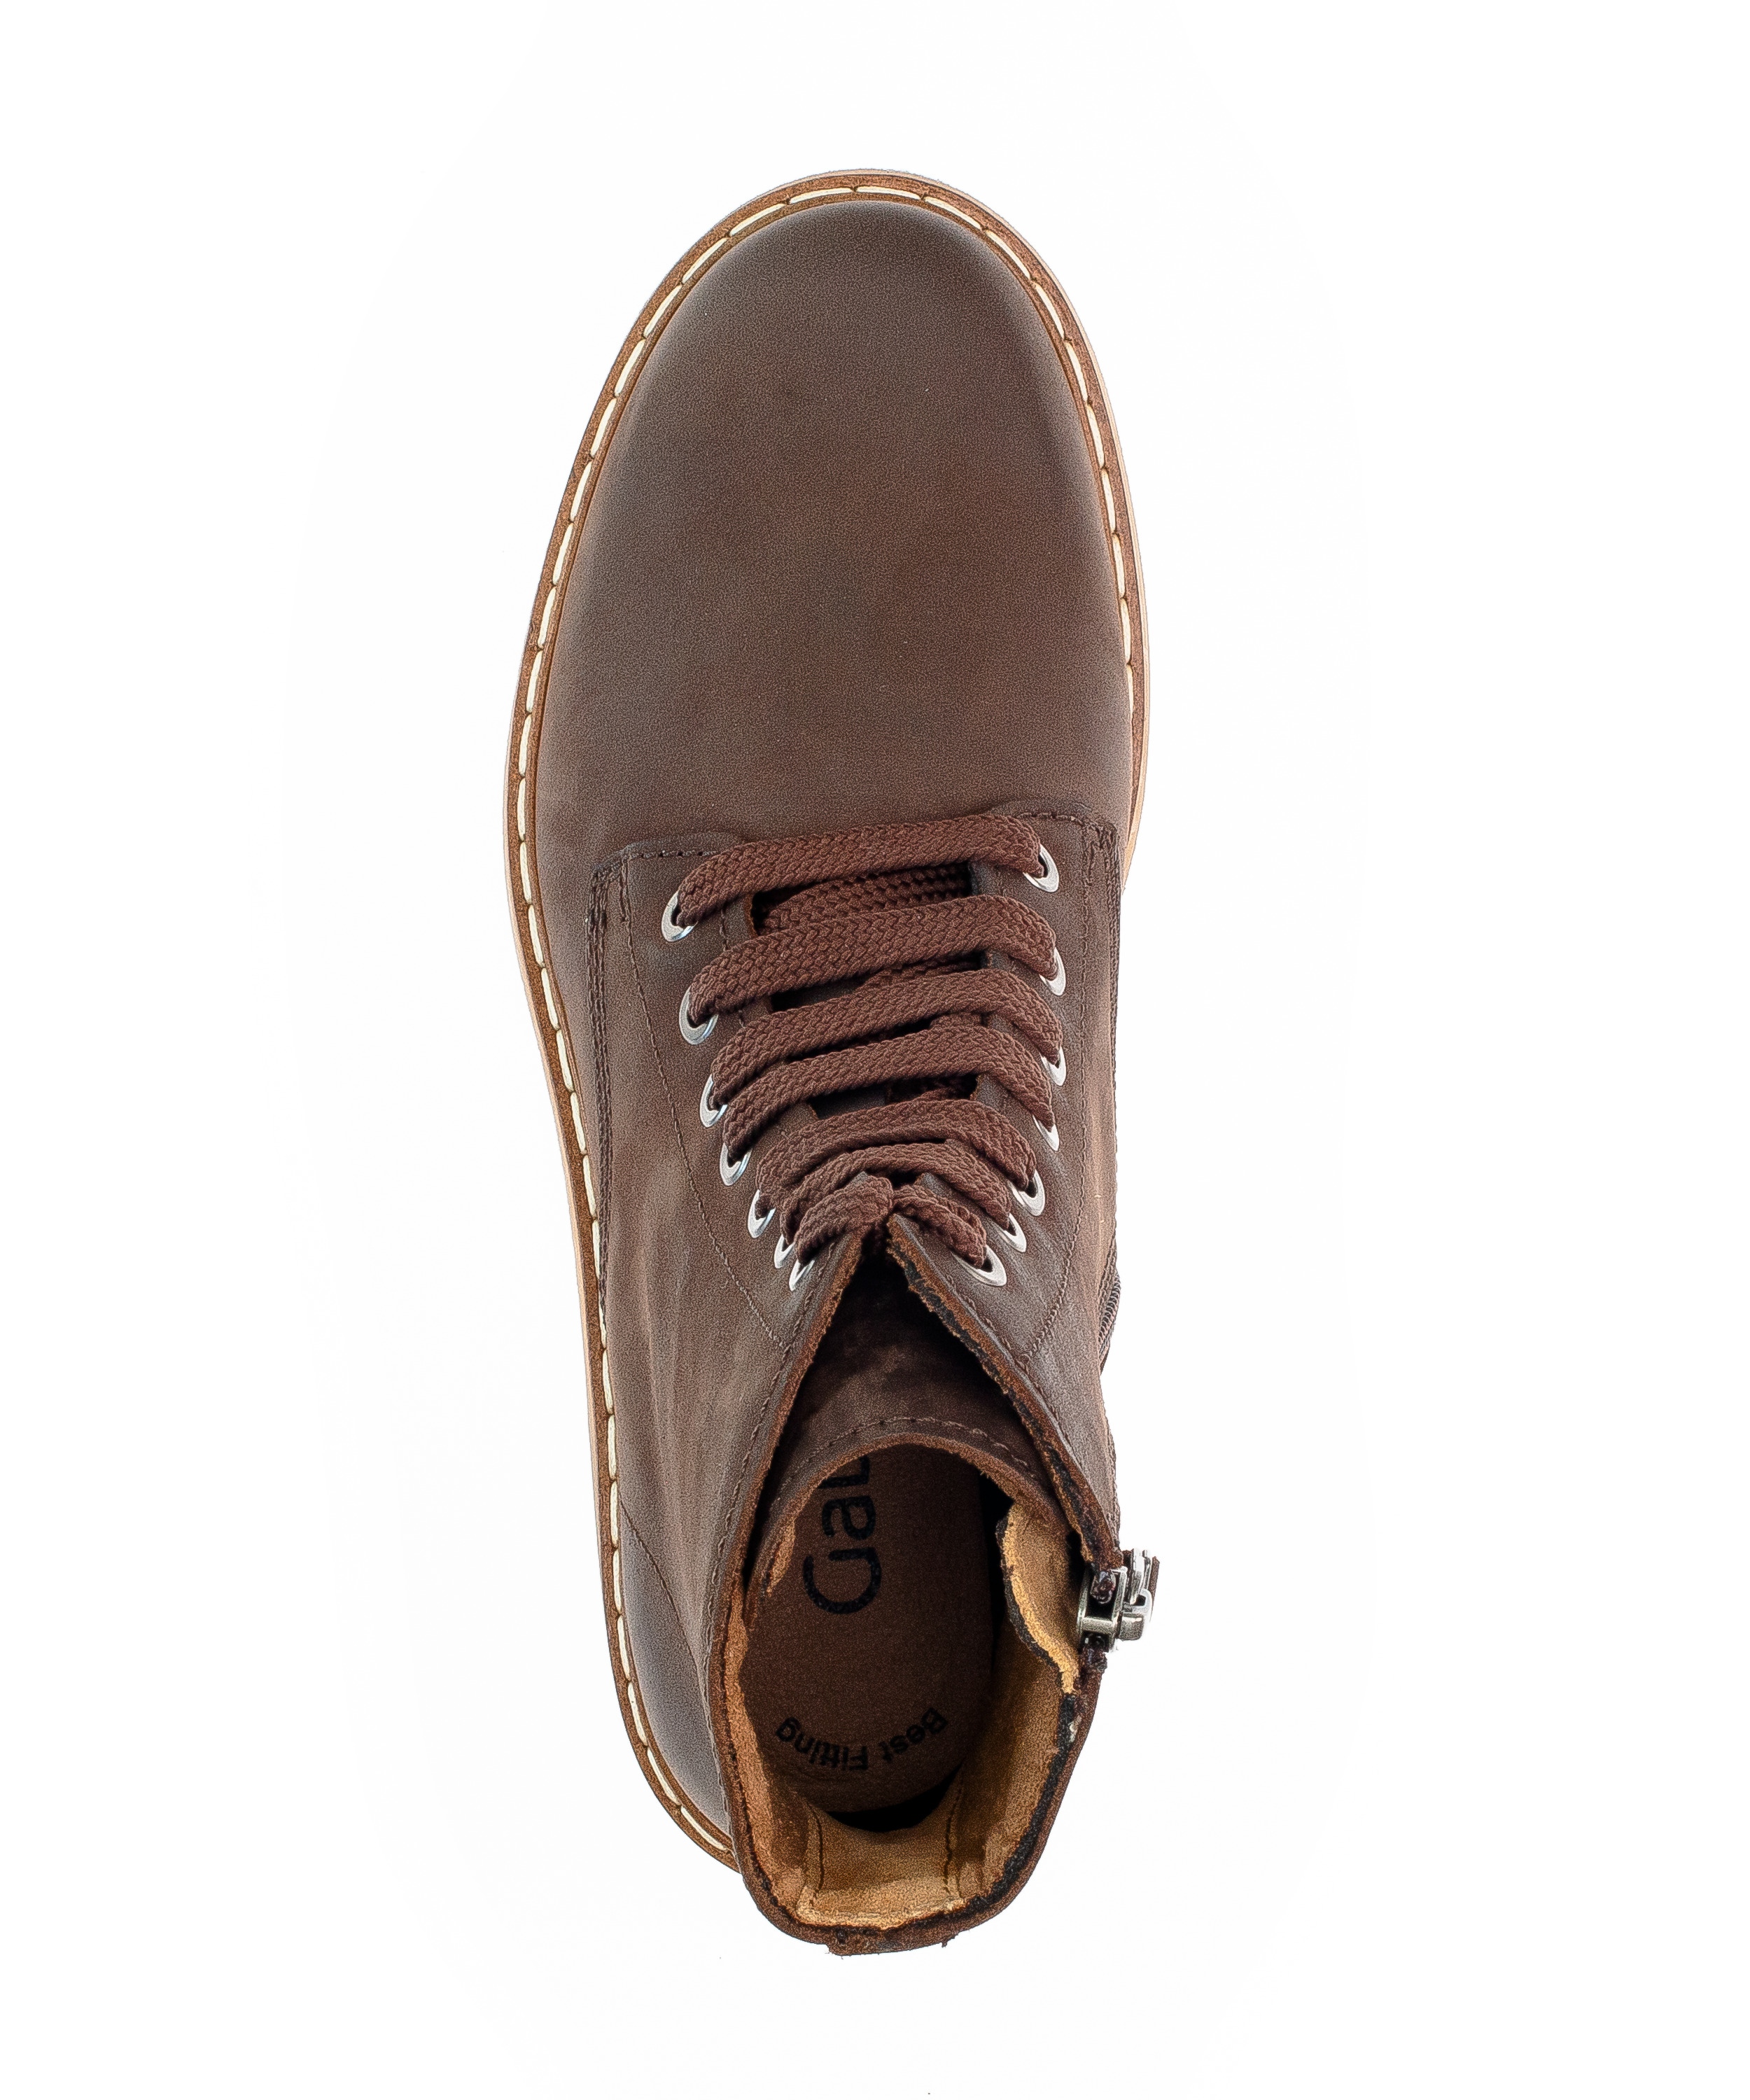 Stiefelette Brown Leather